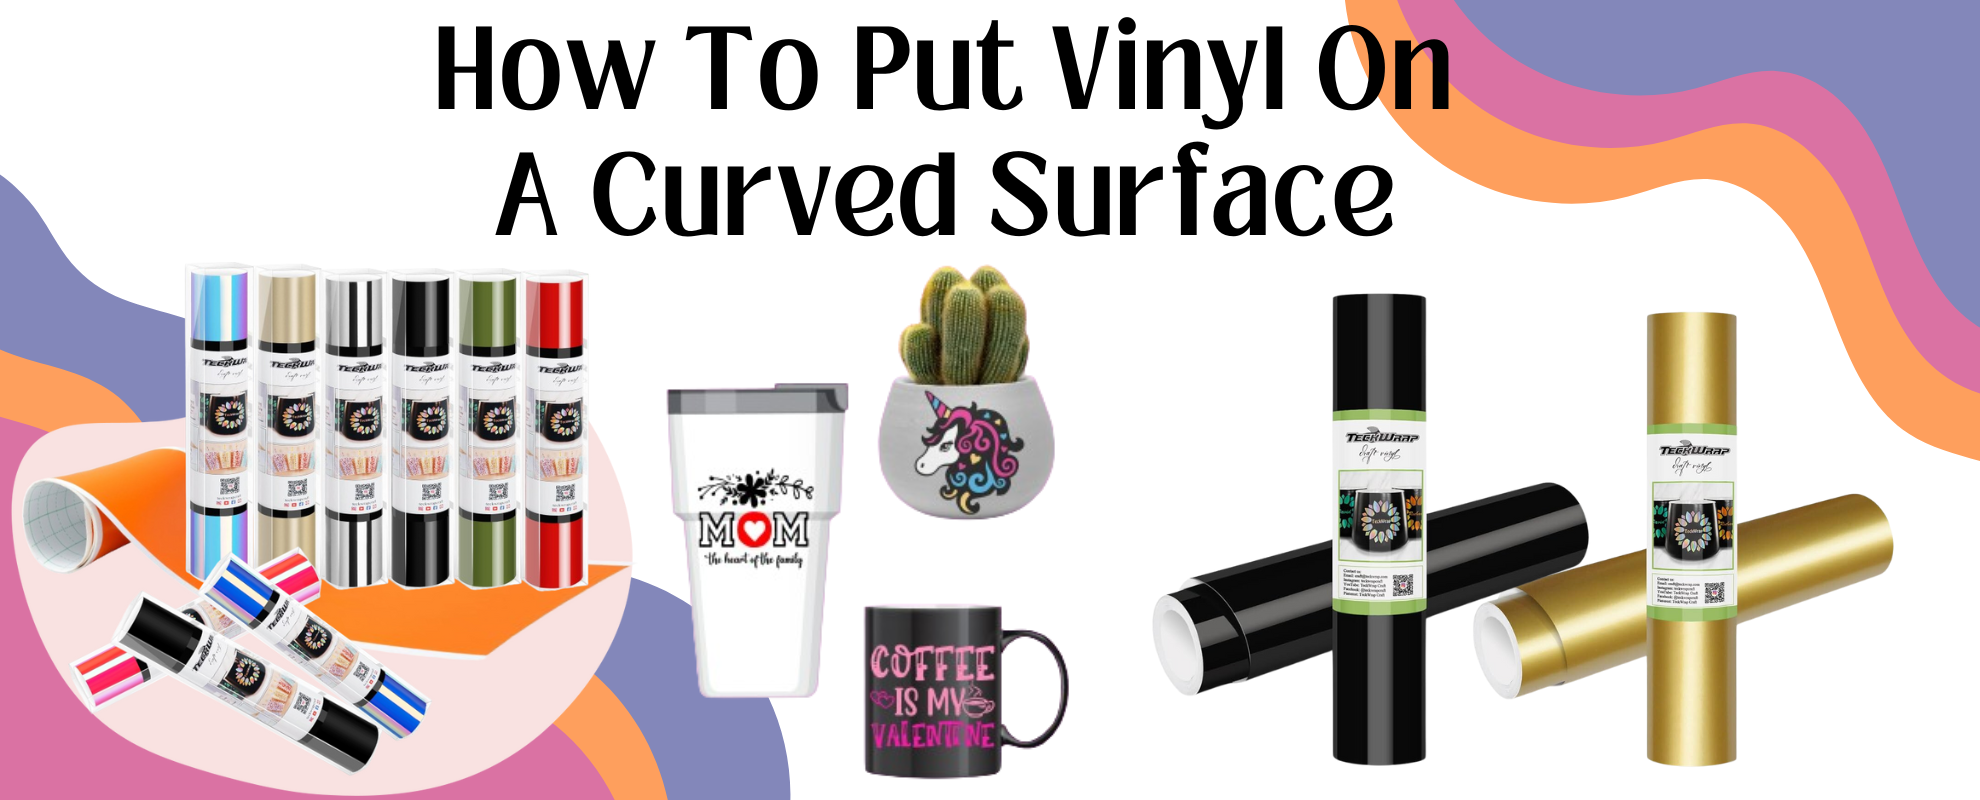 How To Put Vinyl On A Curved Surface.png__PID:98636688-c2af-429e-b427-106f23cf21e5